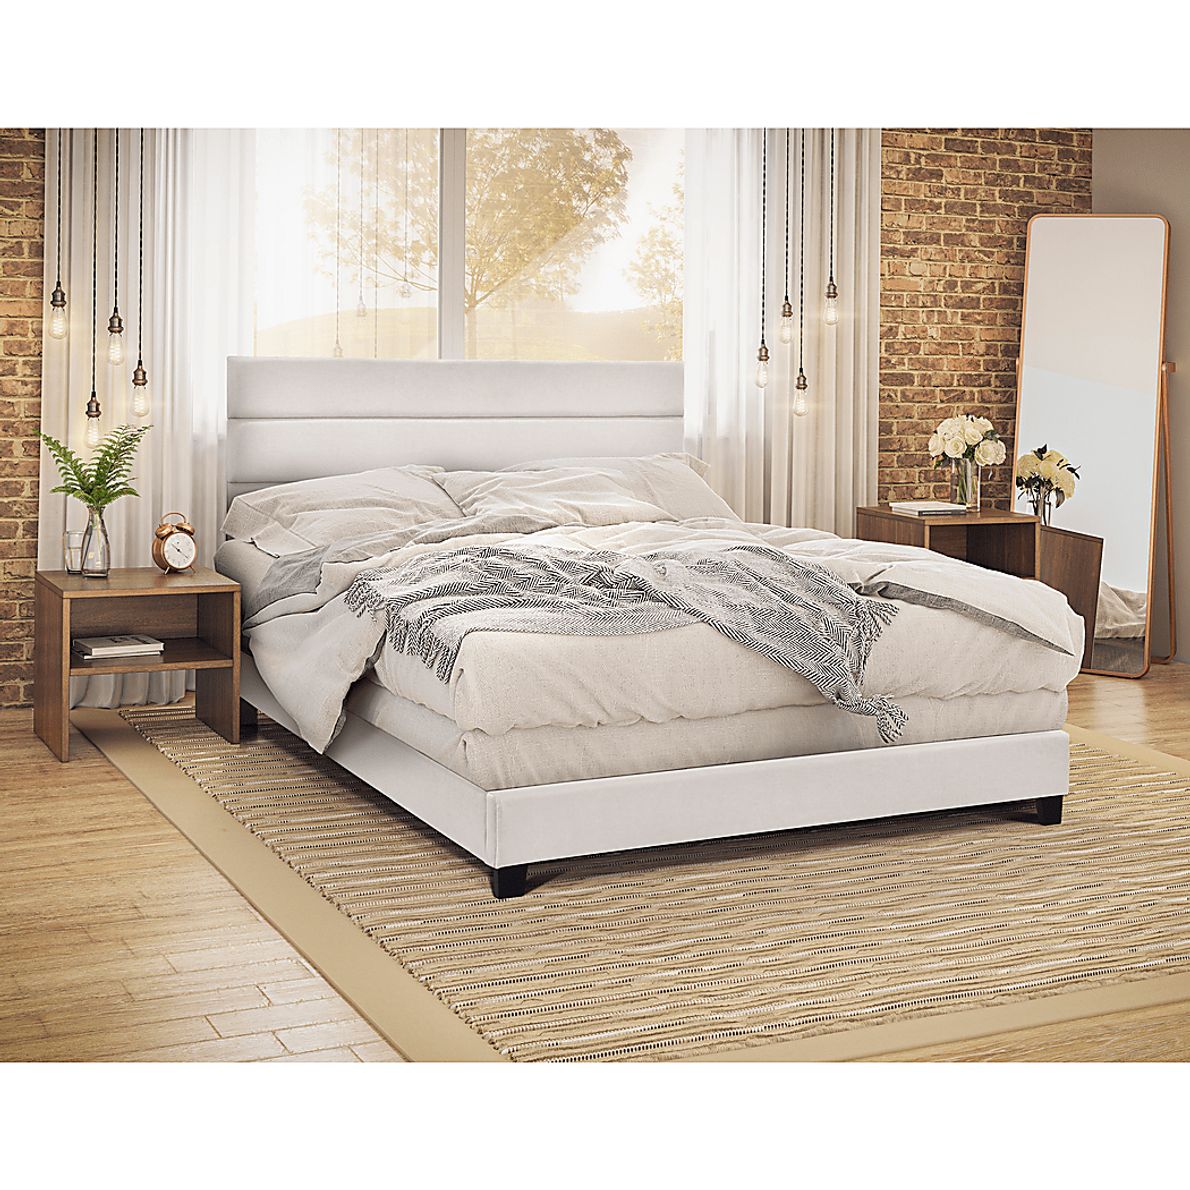 Tampania Gray Queen Bed